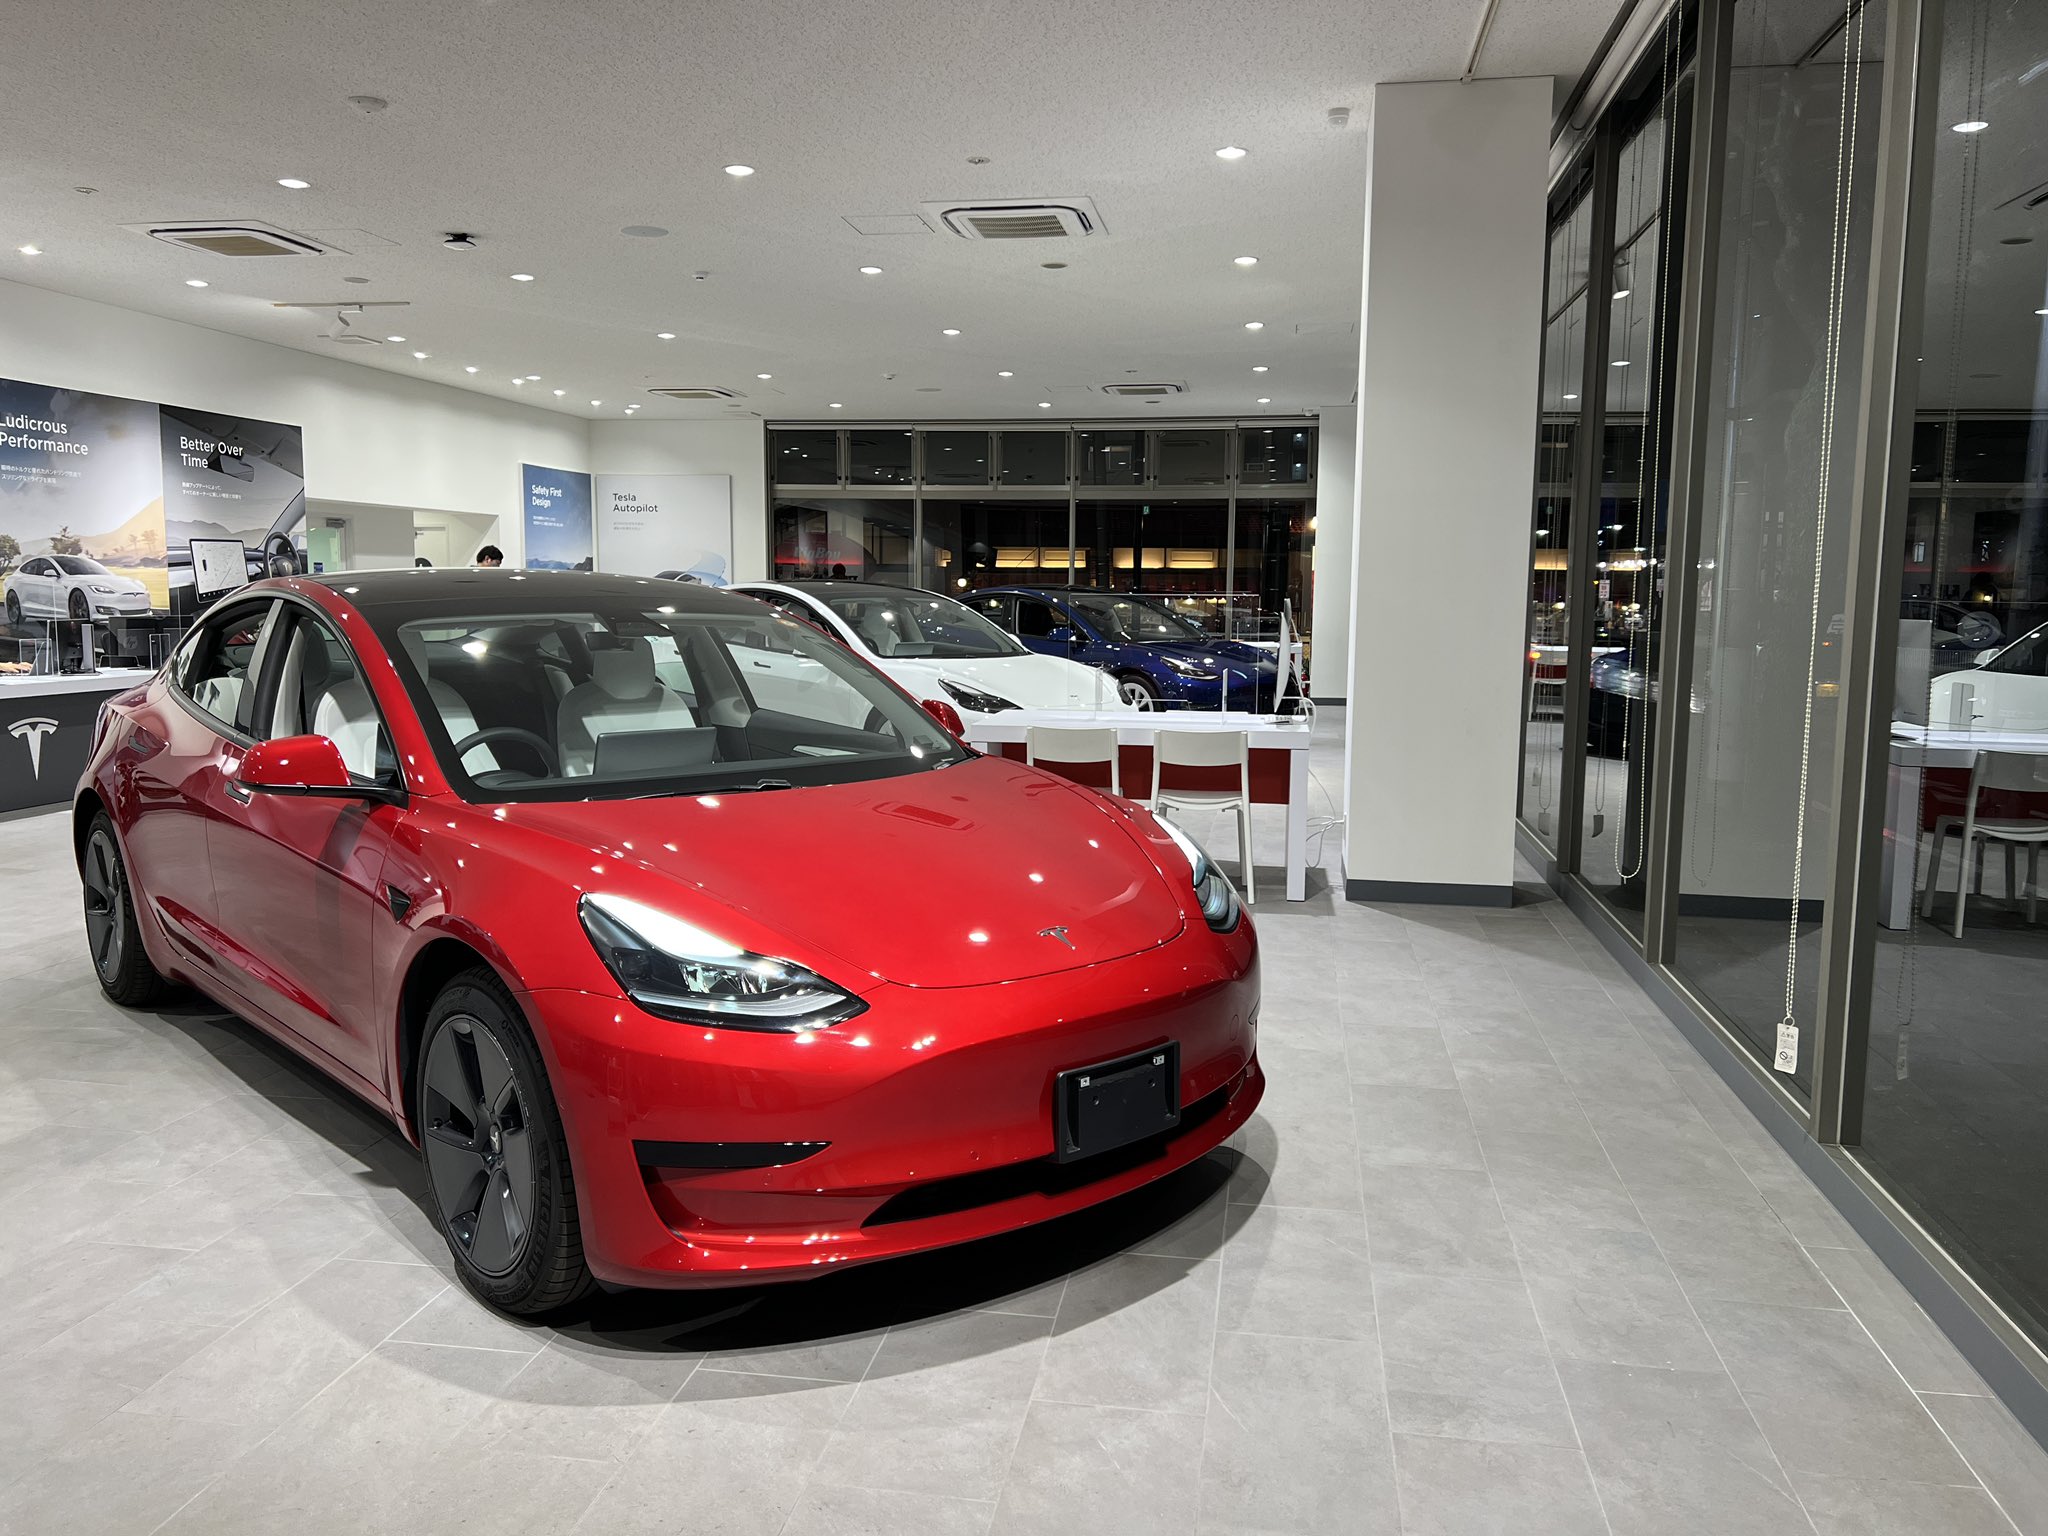 Used Tesla Model 3 cars are selling for $91,000 in Australia